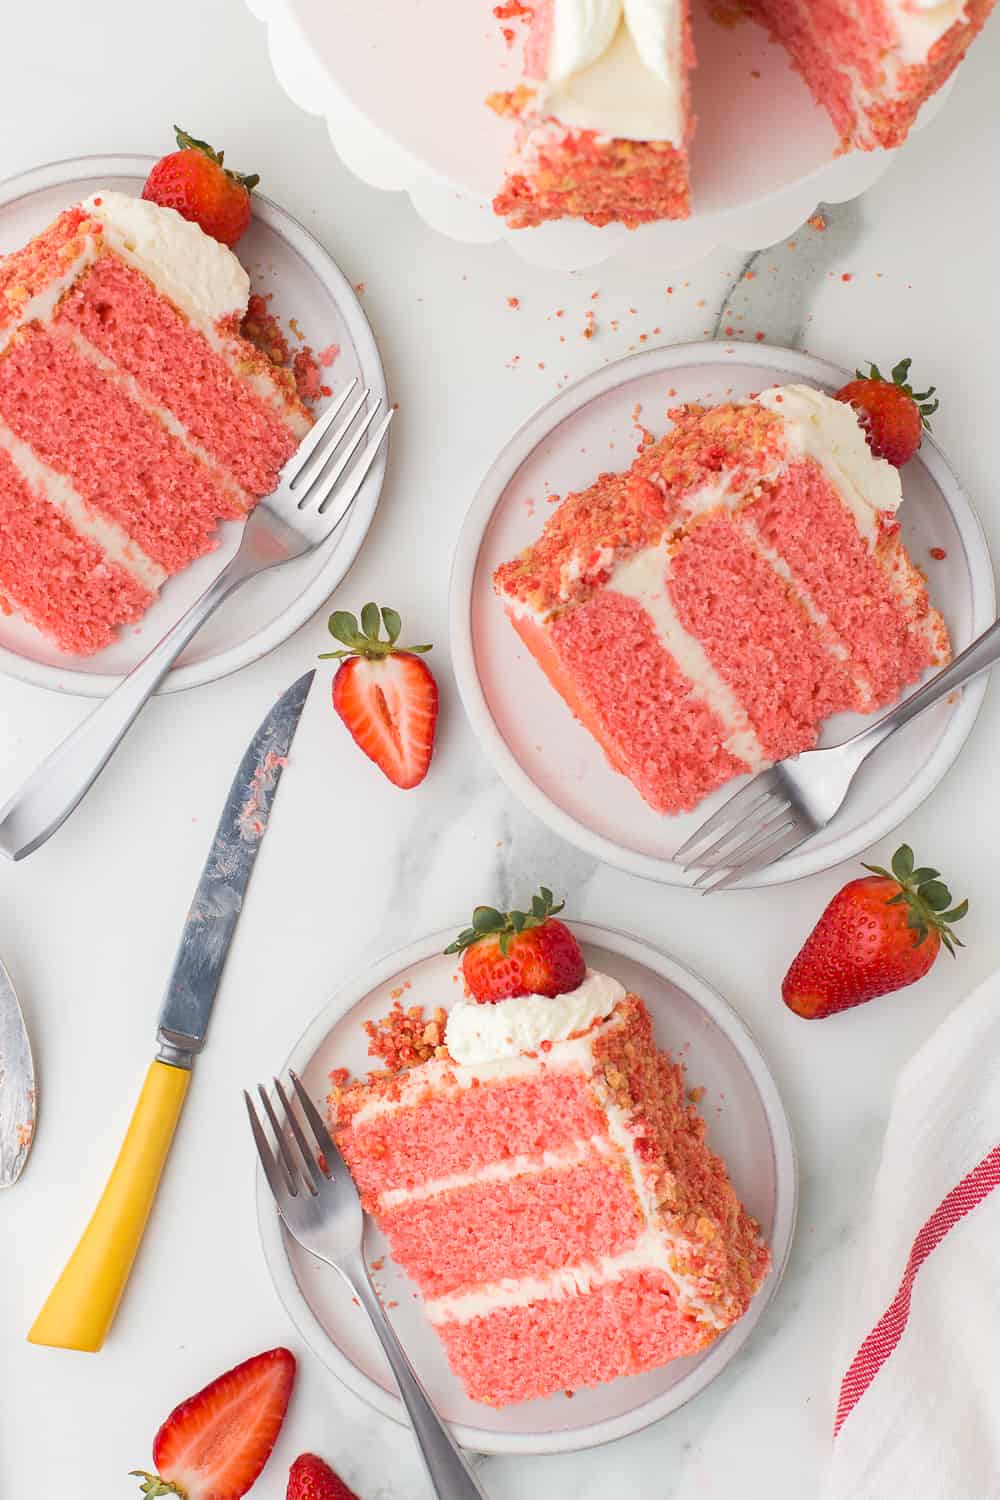 three slices of strawberry cake with fresh strawberries on white plates with forks